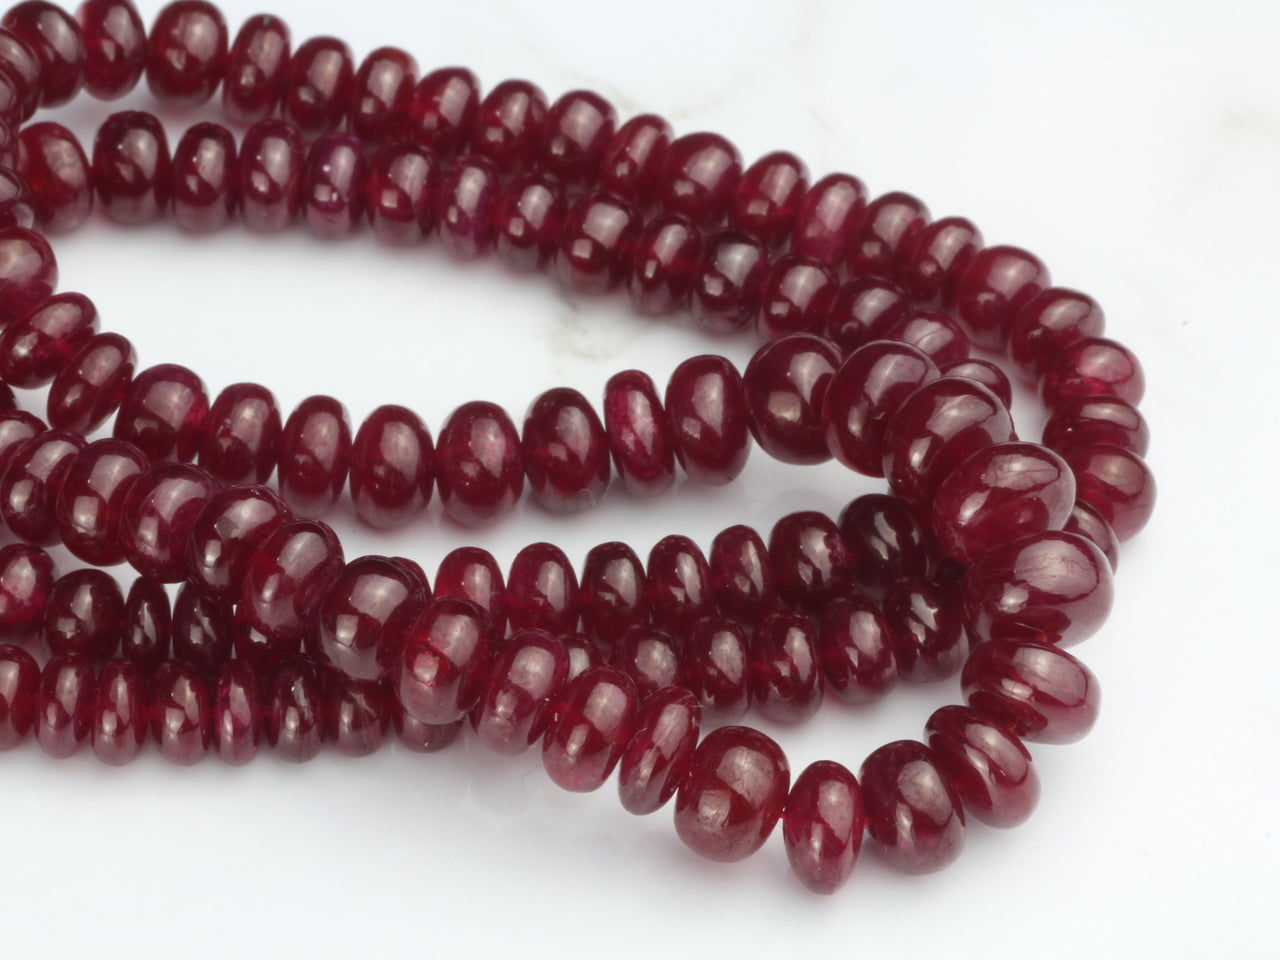 Red Ruby 4.5mm - 6.5mm Smooth Rondelles Bead Strand